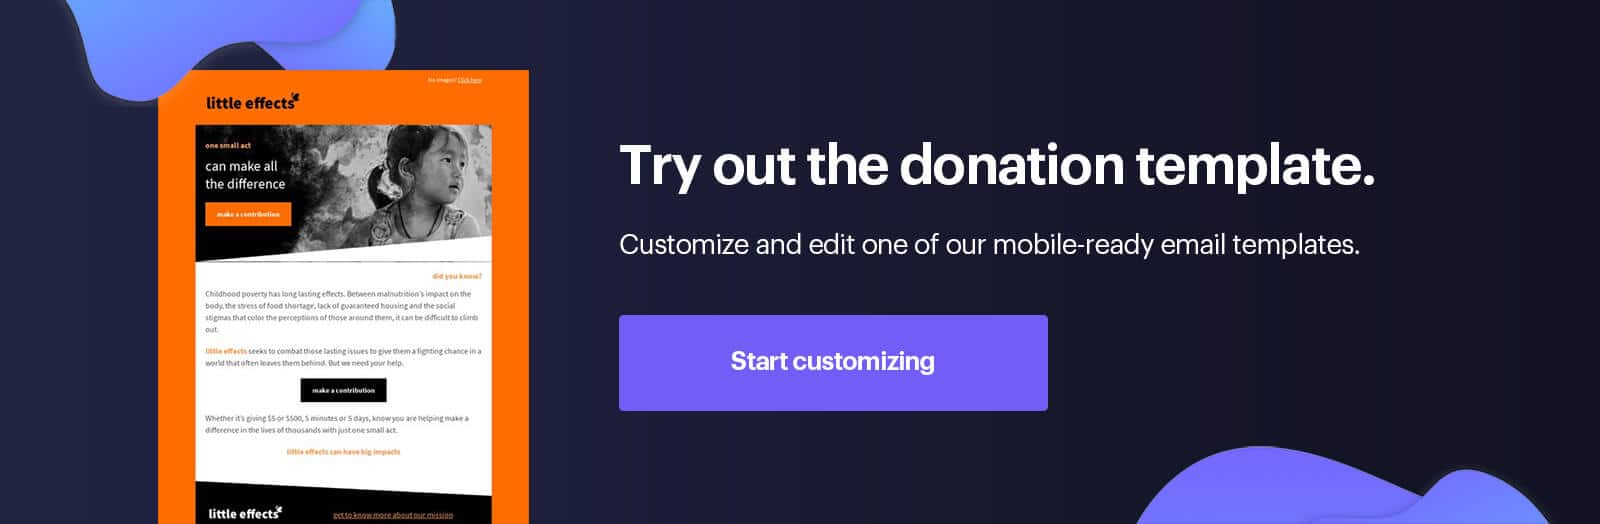 Try out the donation template. Customize and edit one of our mobile-ready email templates.